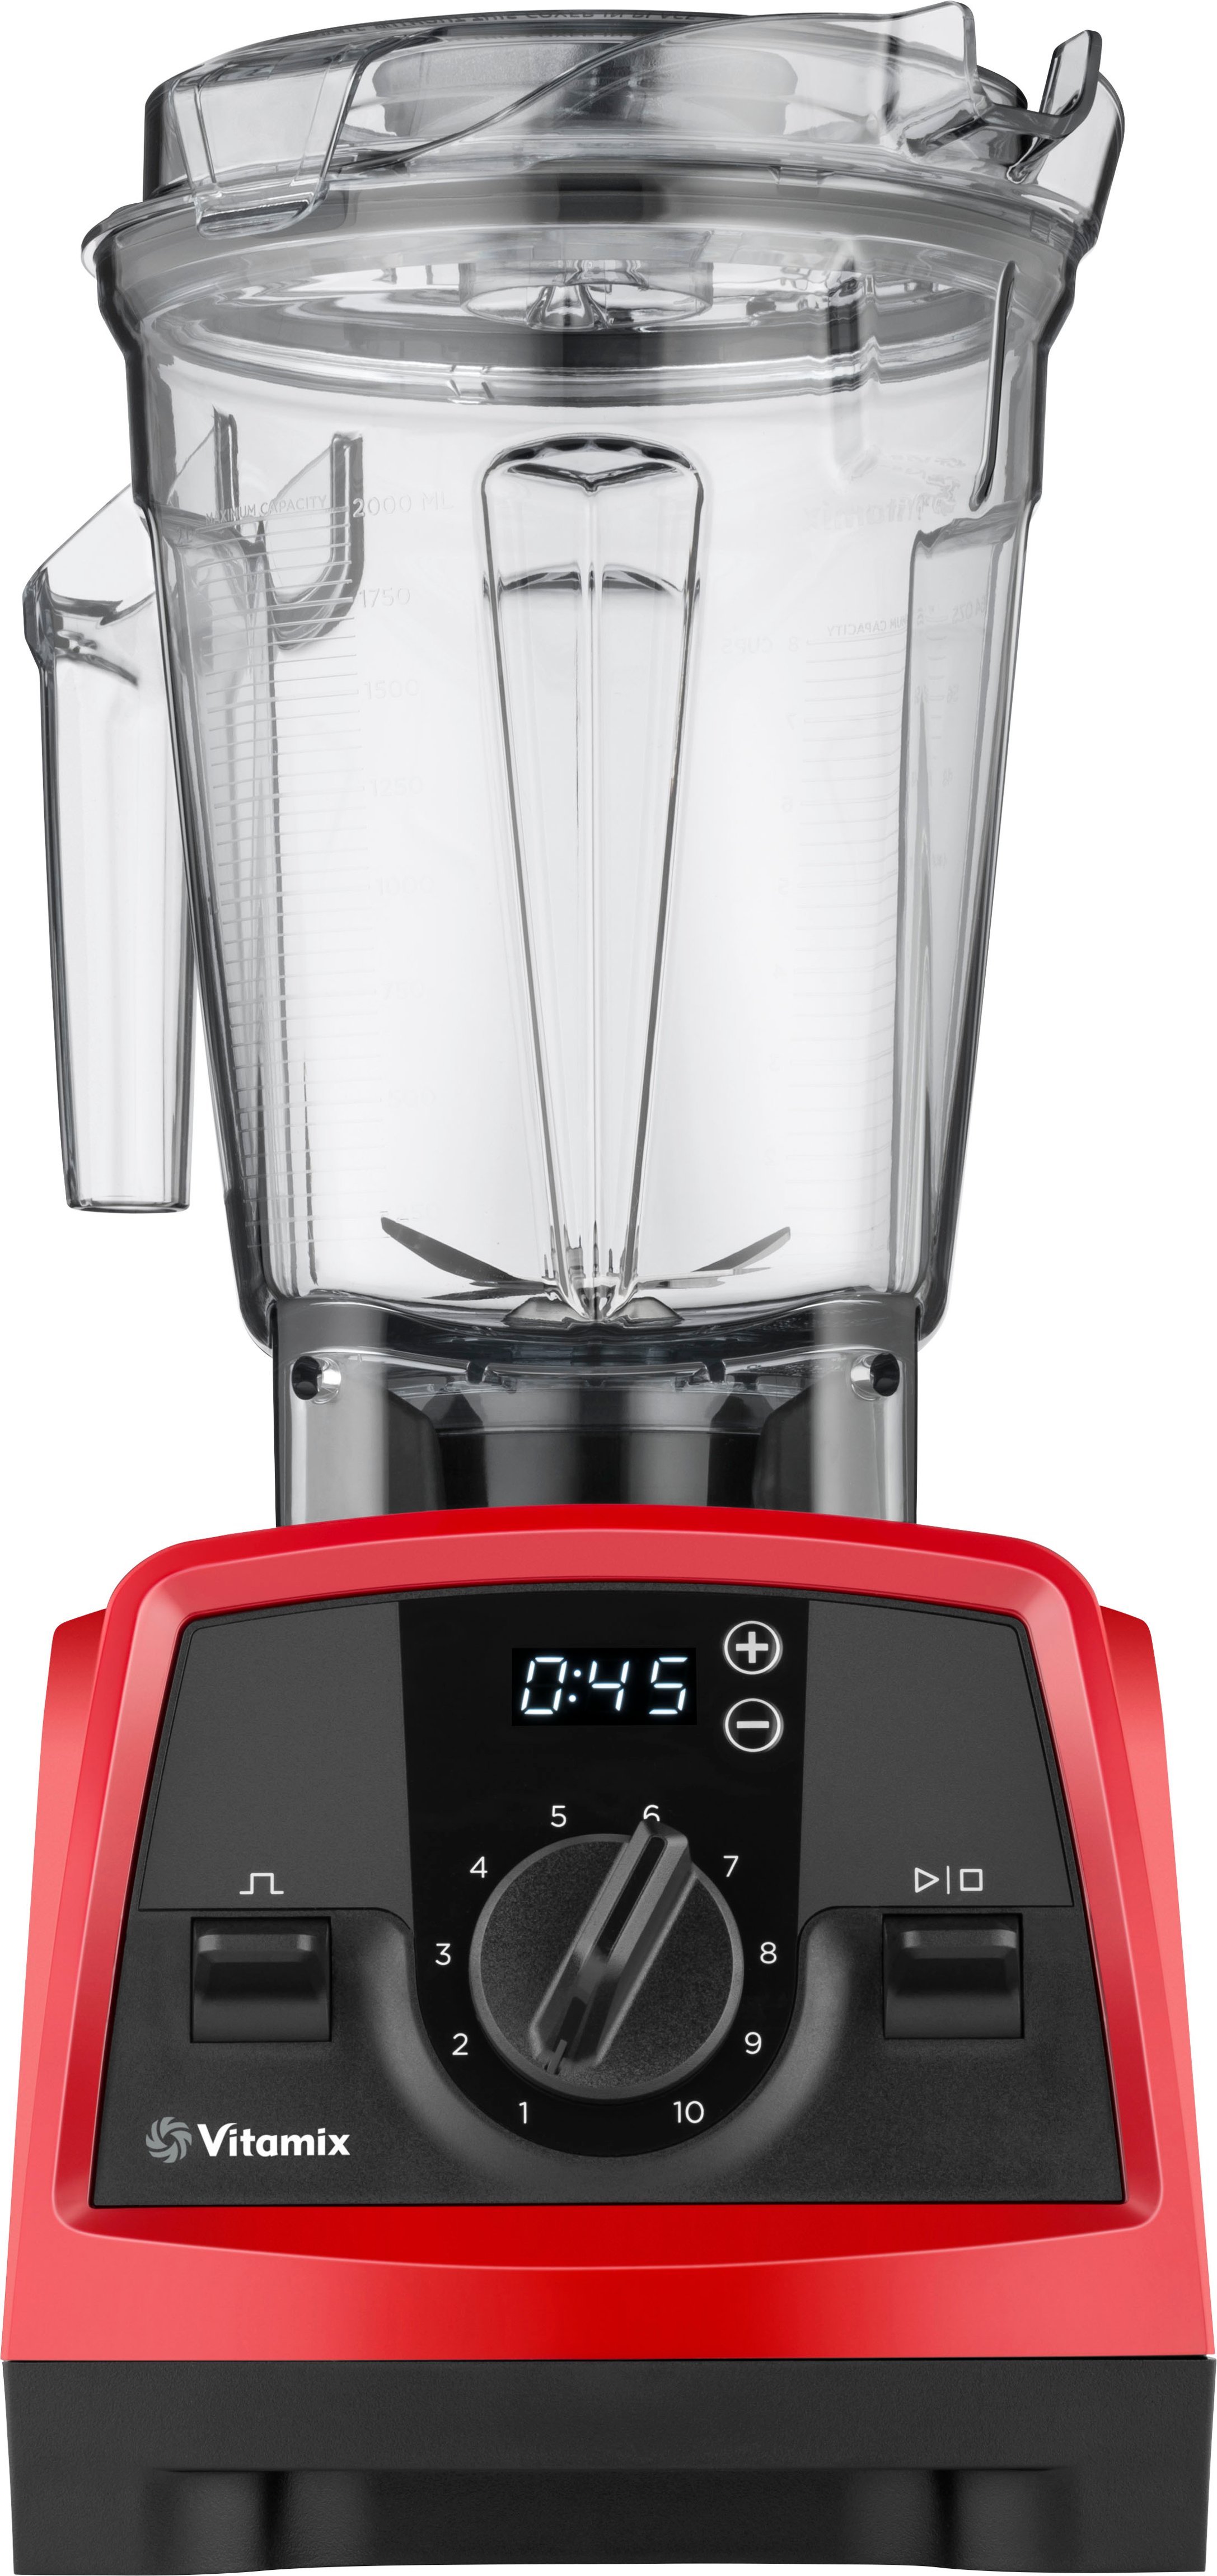 Vitamix premium high performance blender quickly dispatched with